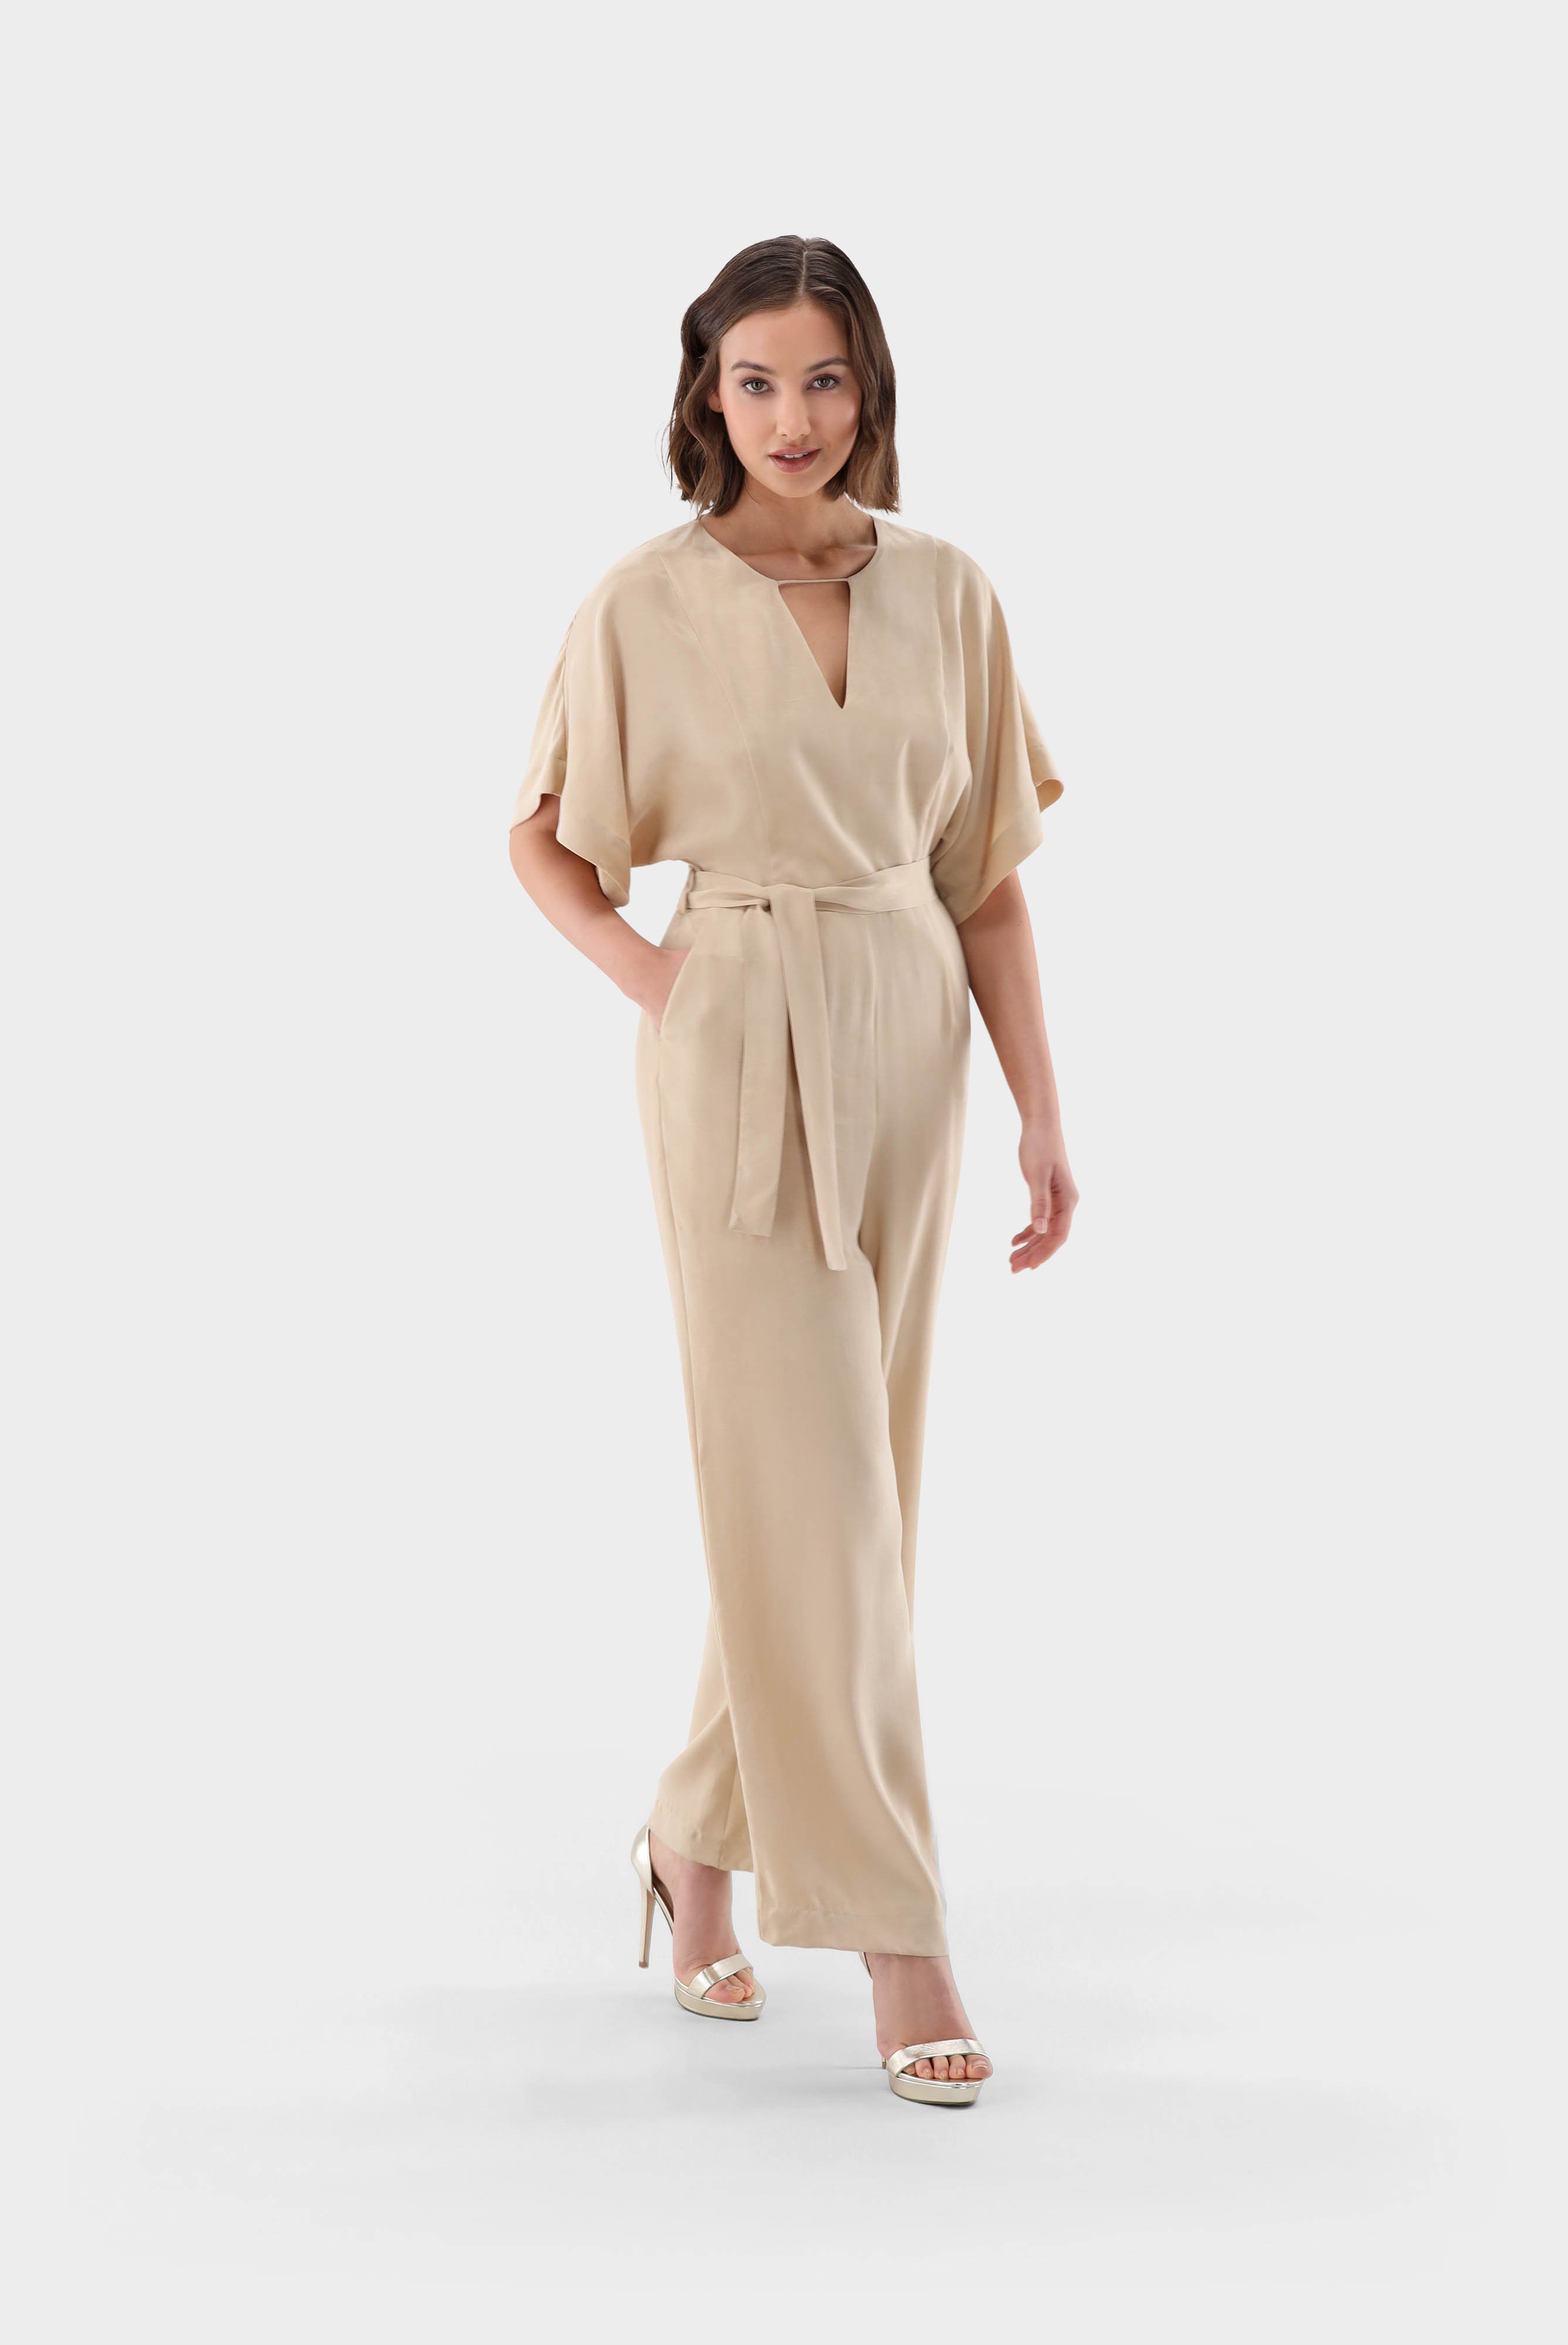 Jeans & Trousers+Jumpsuit with wide Sleeves+05.658Q.22.155007.250.34